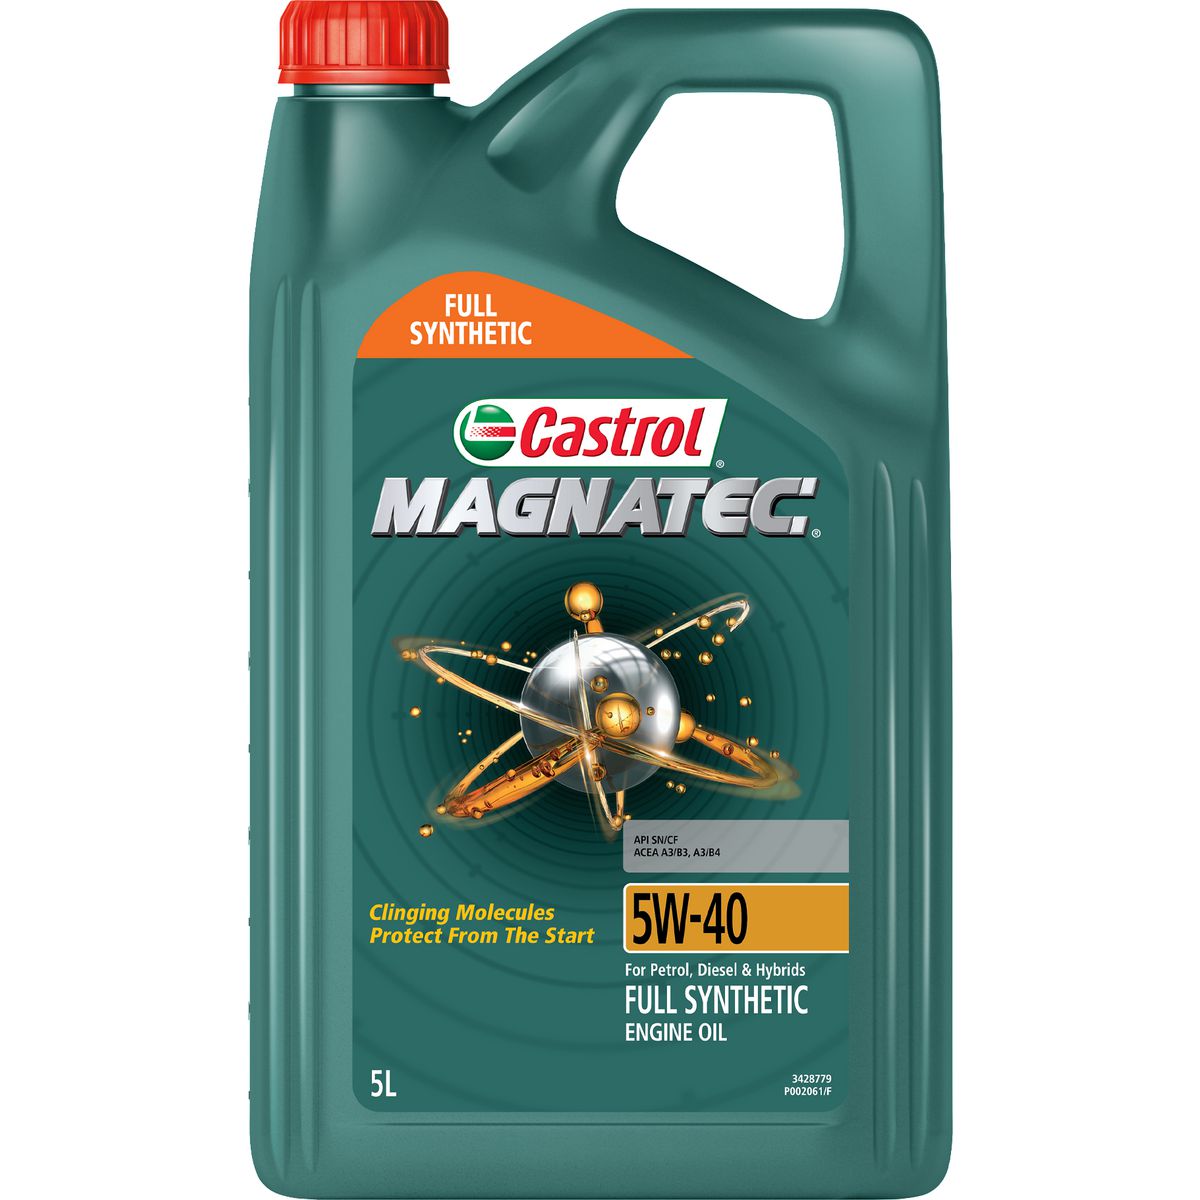 Castrol Magnatec 5W-40 Full Synthetic Engine Oil - 5L - 3428779 - Auto One